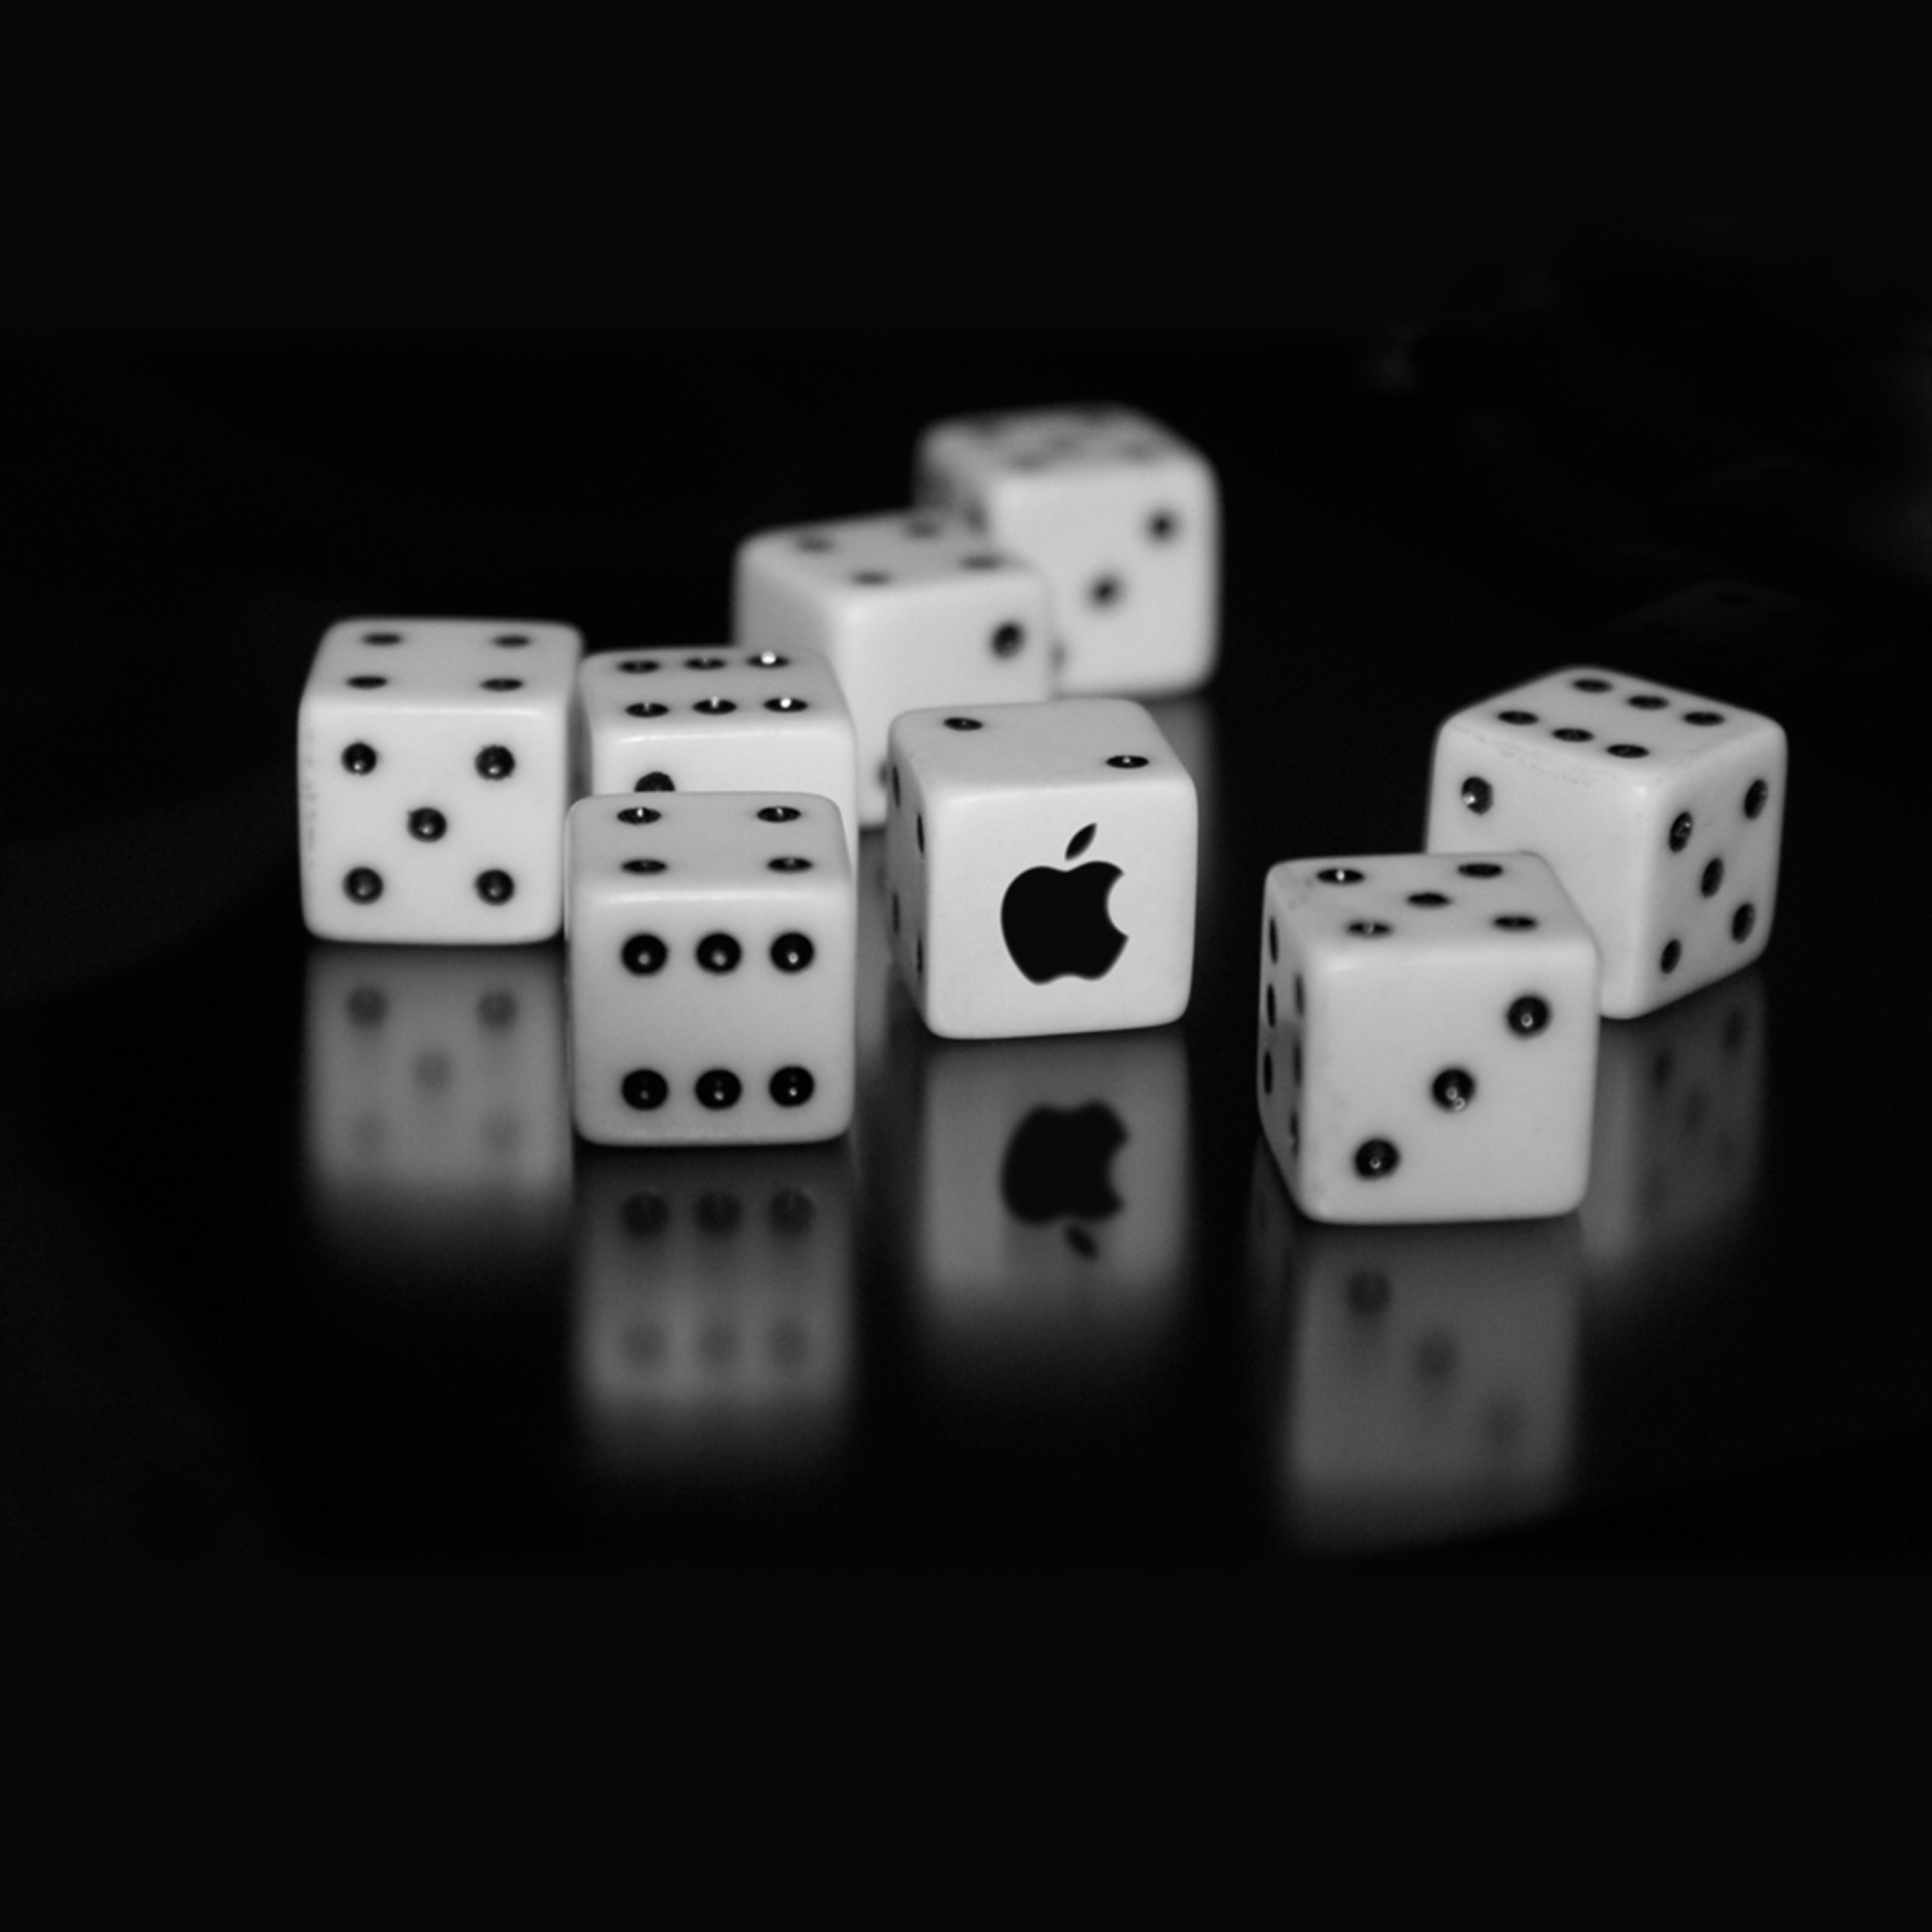 Glitchy Dice wallpaper by DragonCatz4300  Download on ZEDGE  07a5